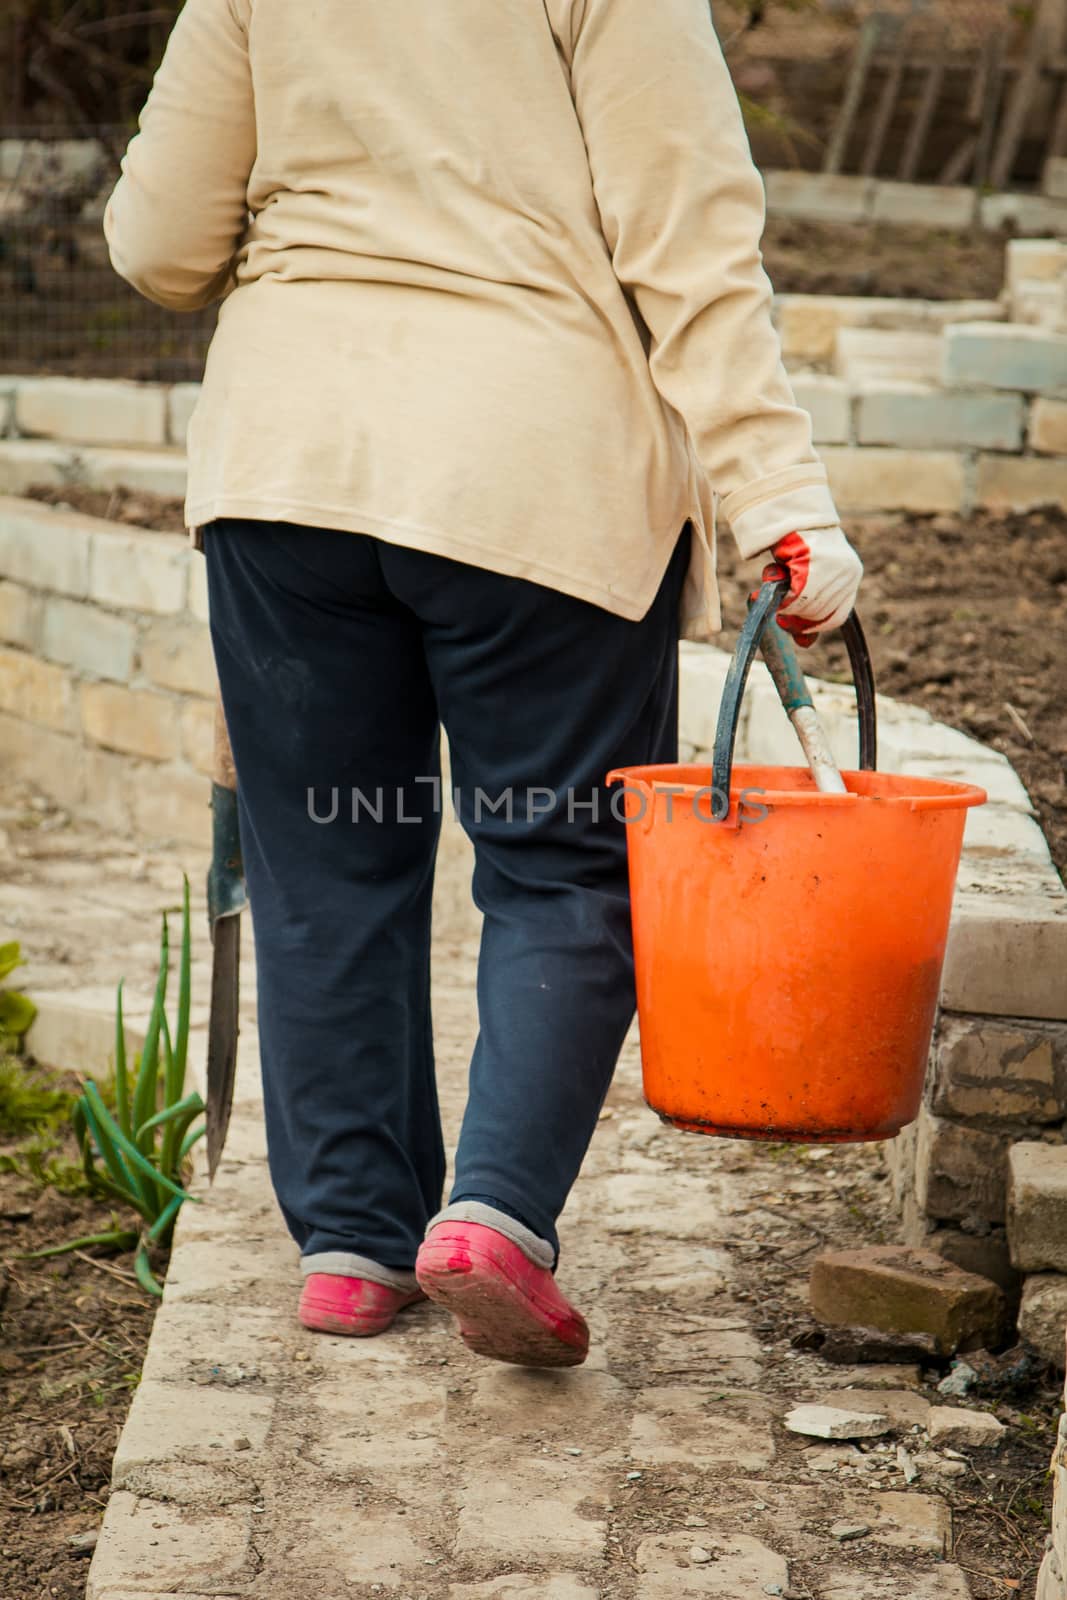 Farmer woman carrying a bucket walking outdoor by yulaphotographer